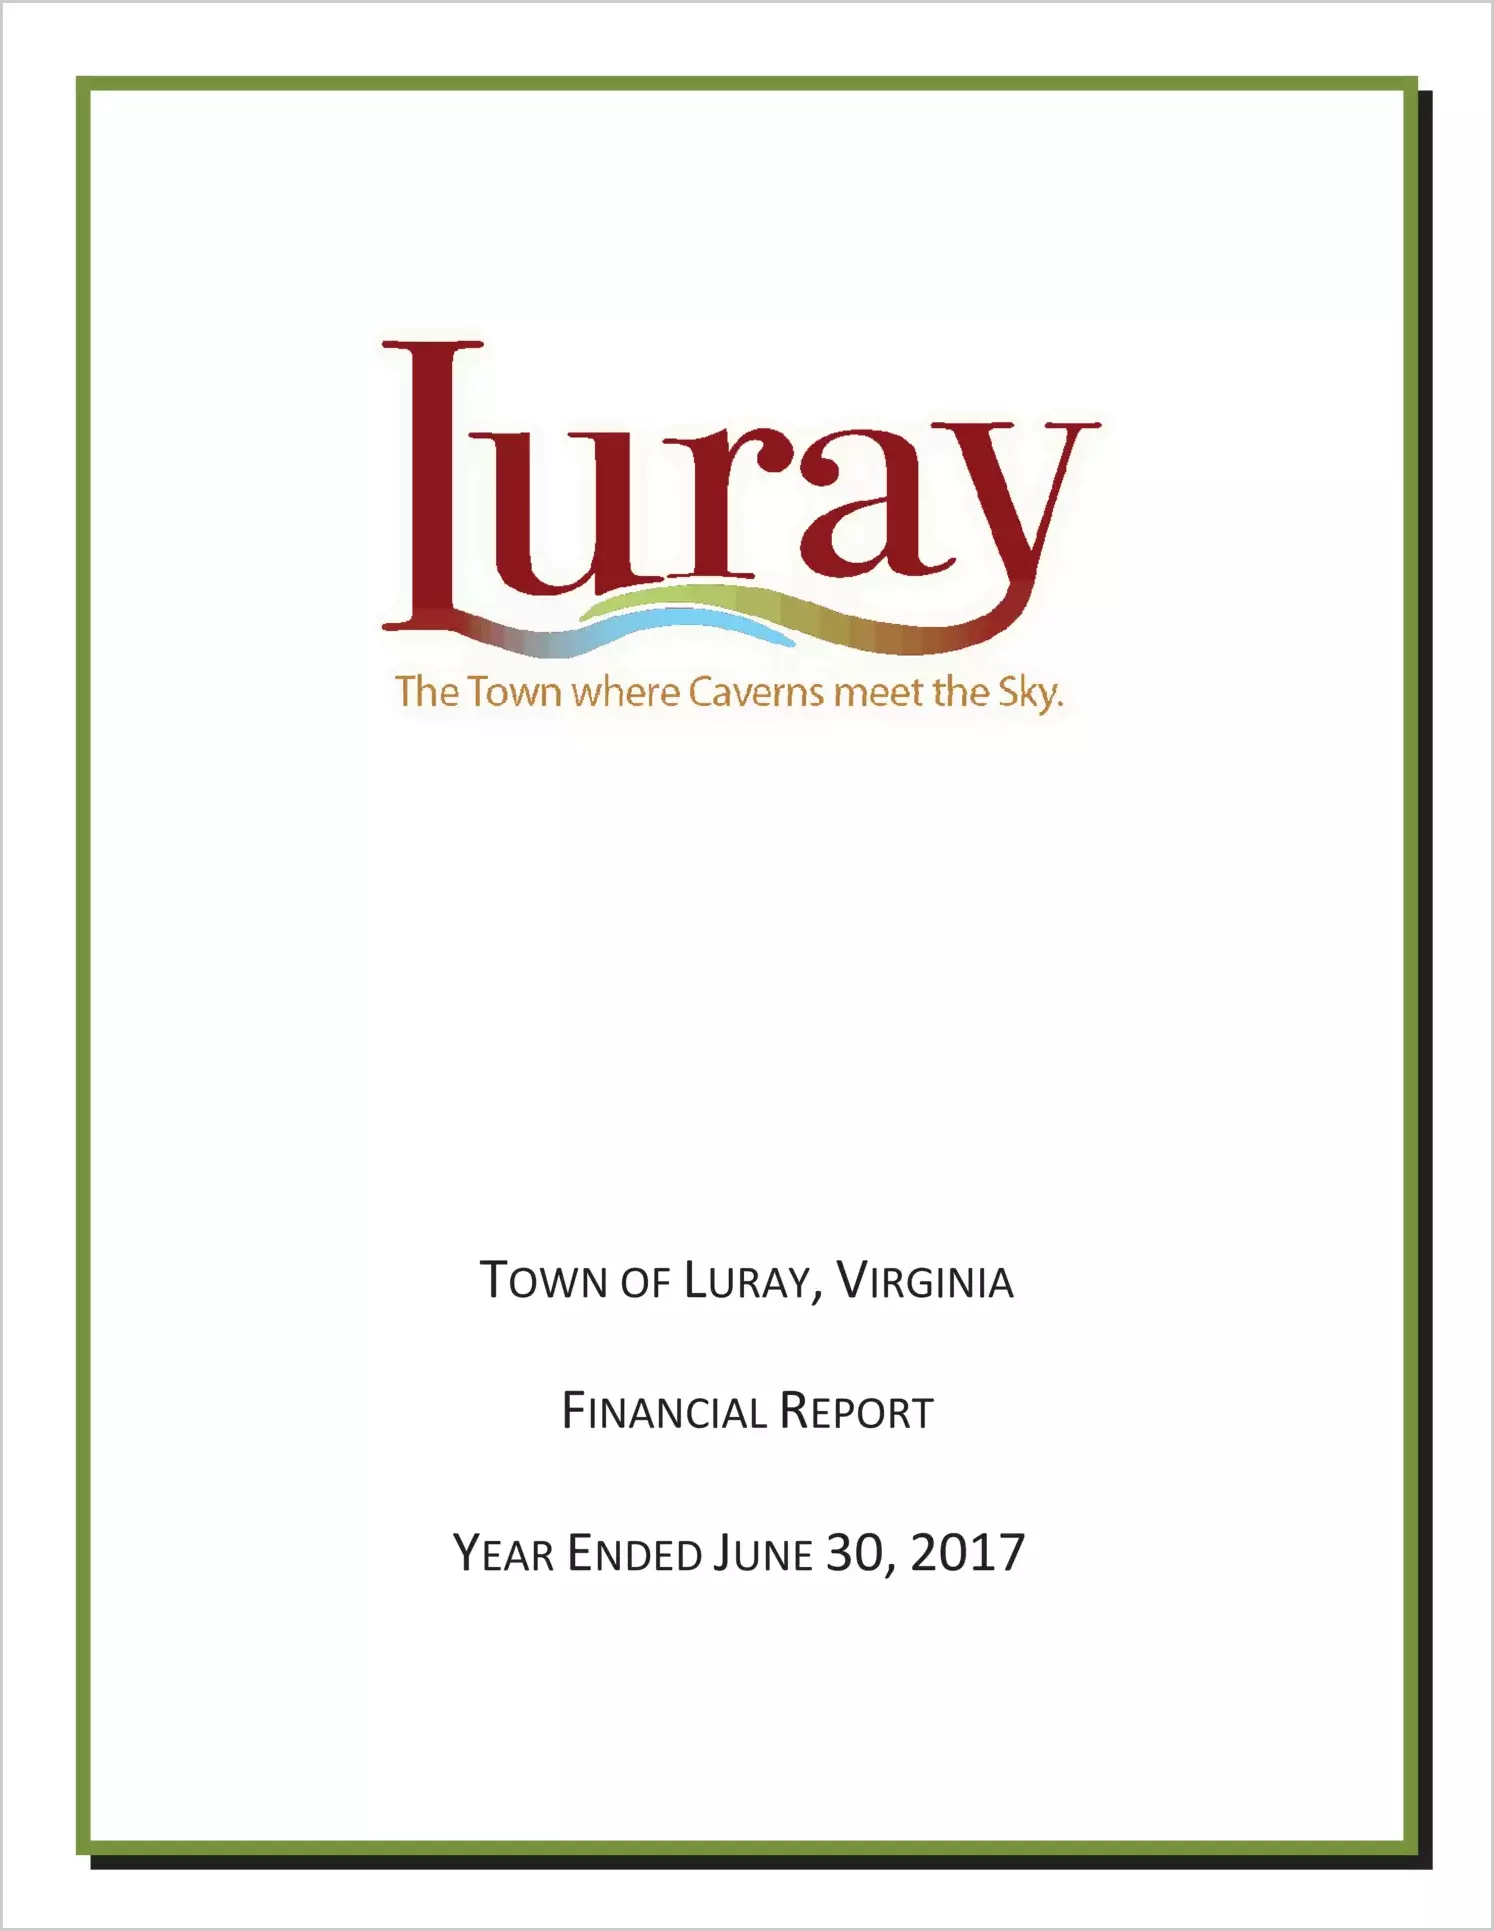 2017 Annual Financial Report for Town of Luray